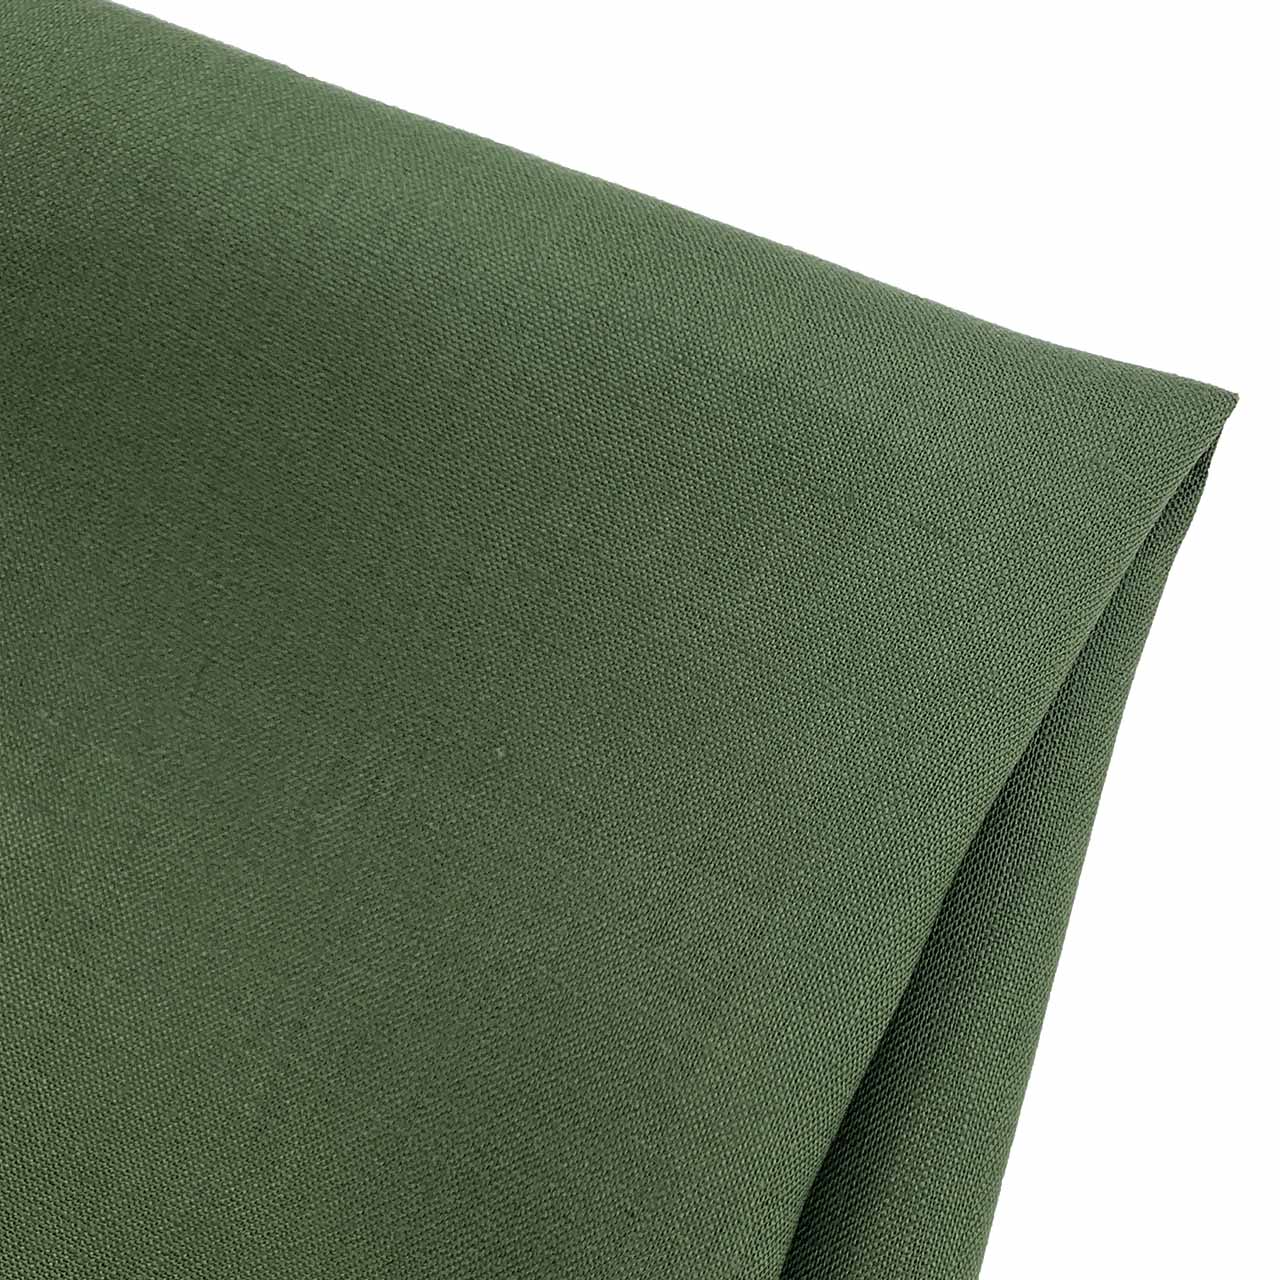 kale green linen fabric - Fabric Collection